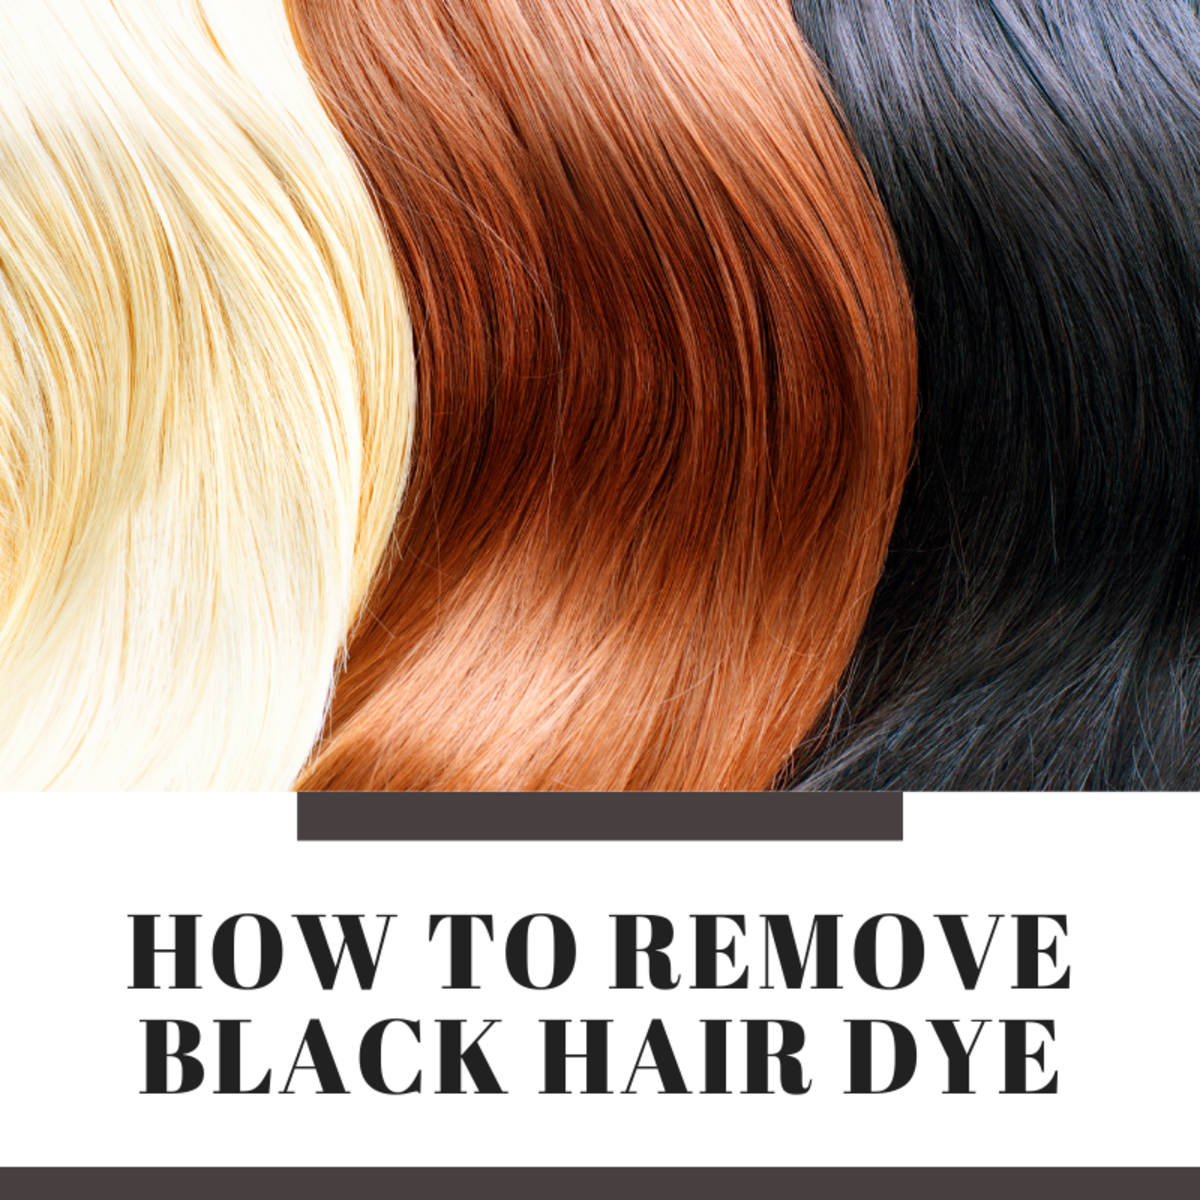 How to Remove Black Hair Dye